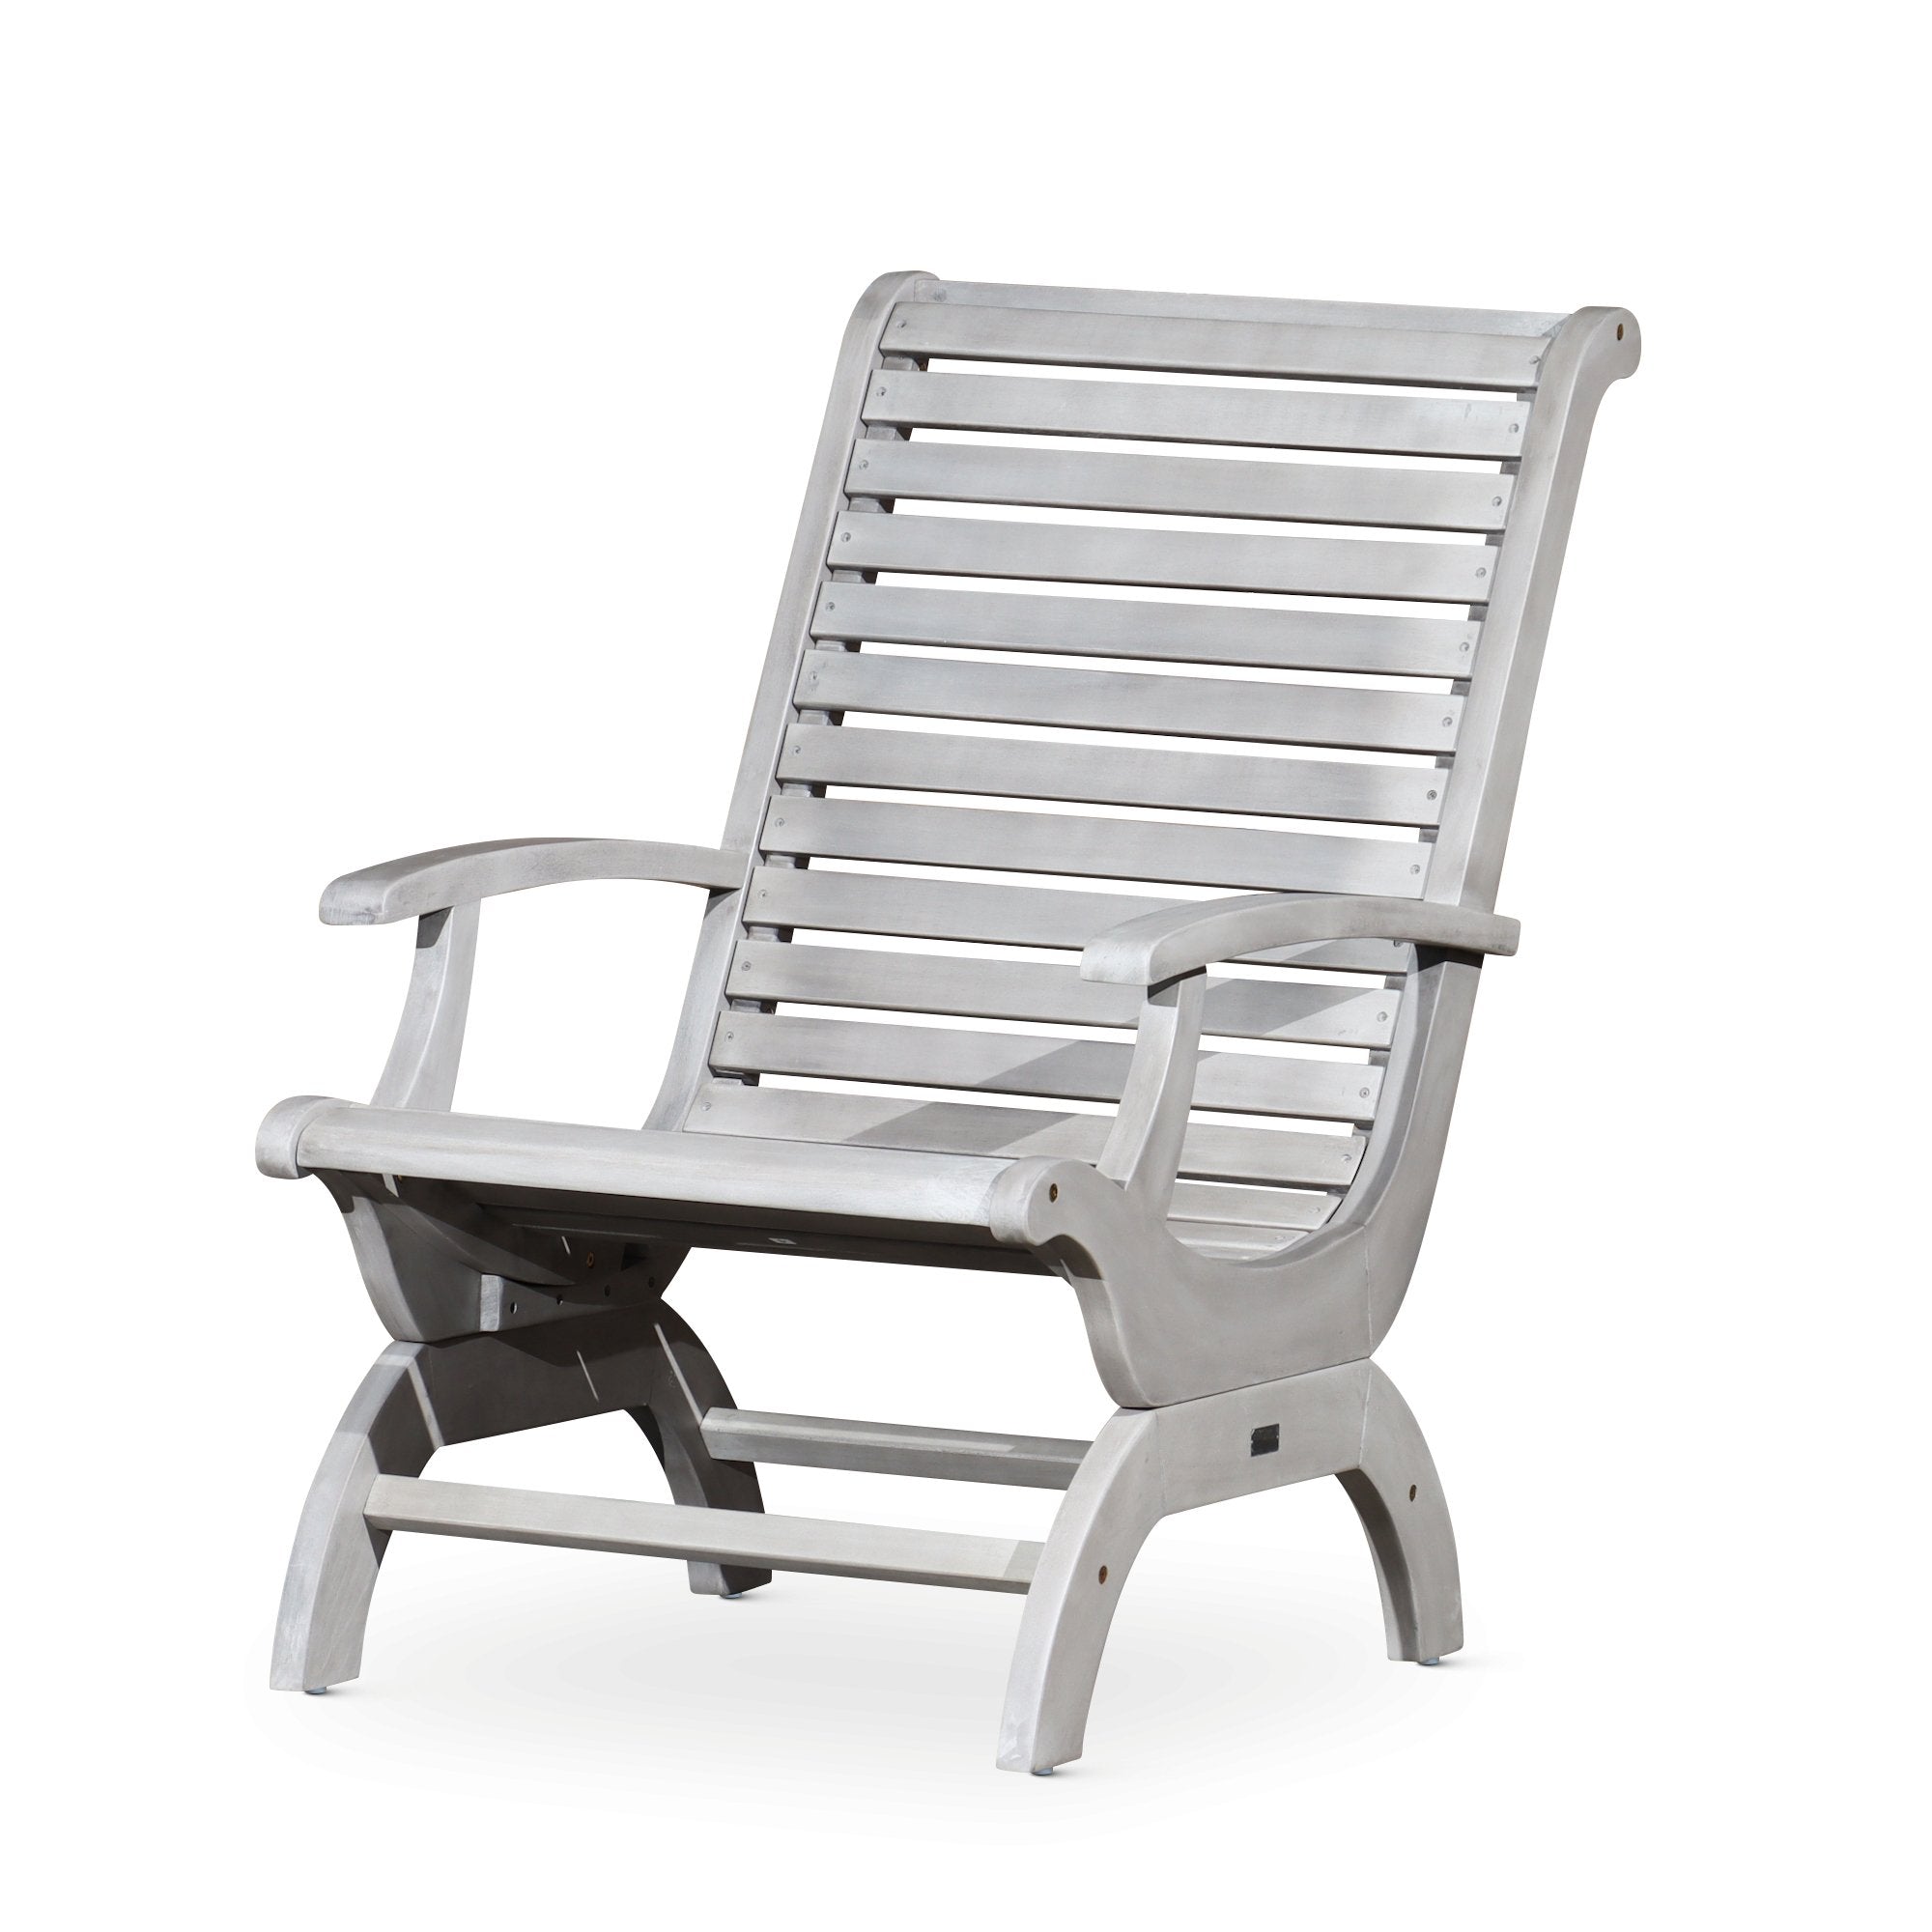 Outdoor-Plantation-Chair,-Silver-Gray-Outdoor-Chairs